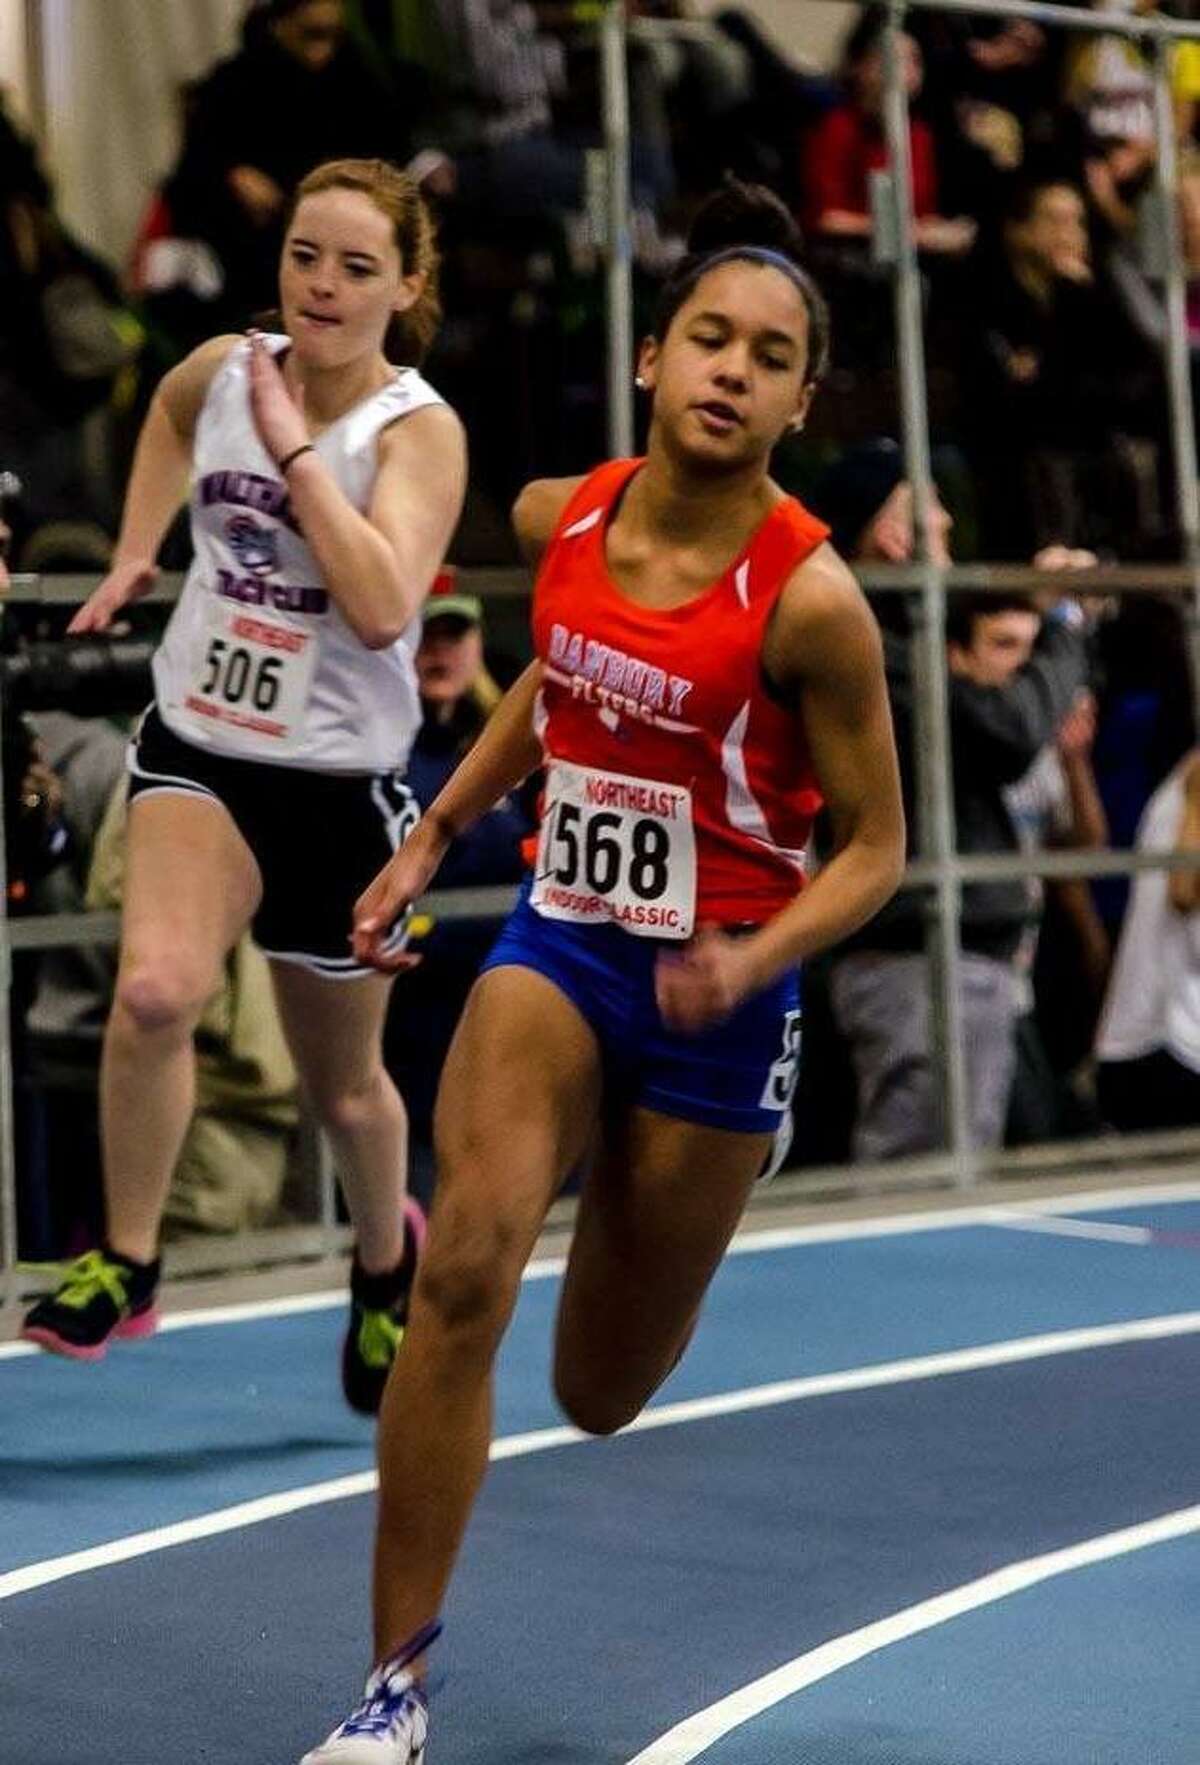 Danbury’s Alanna Smith is one of the top performers for the Danbury Flyers youth track program.